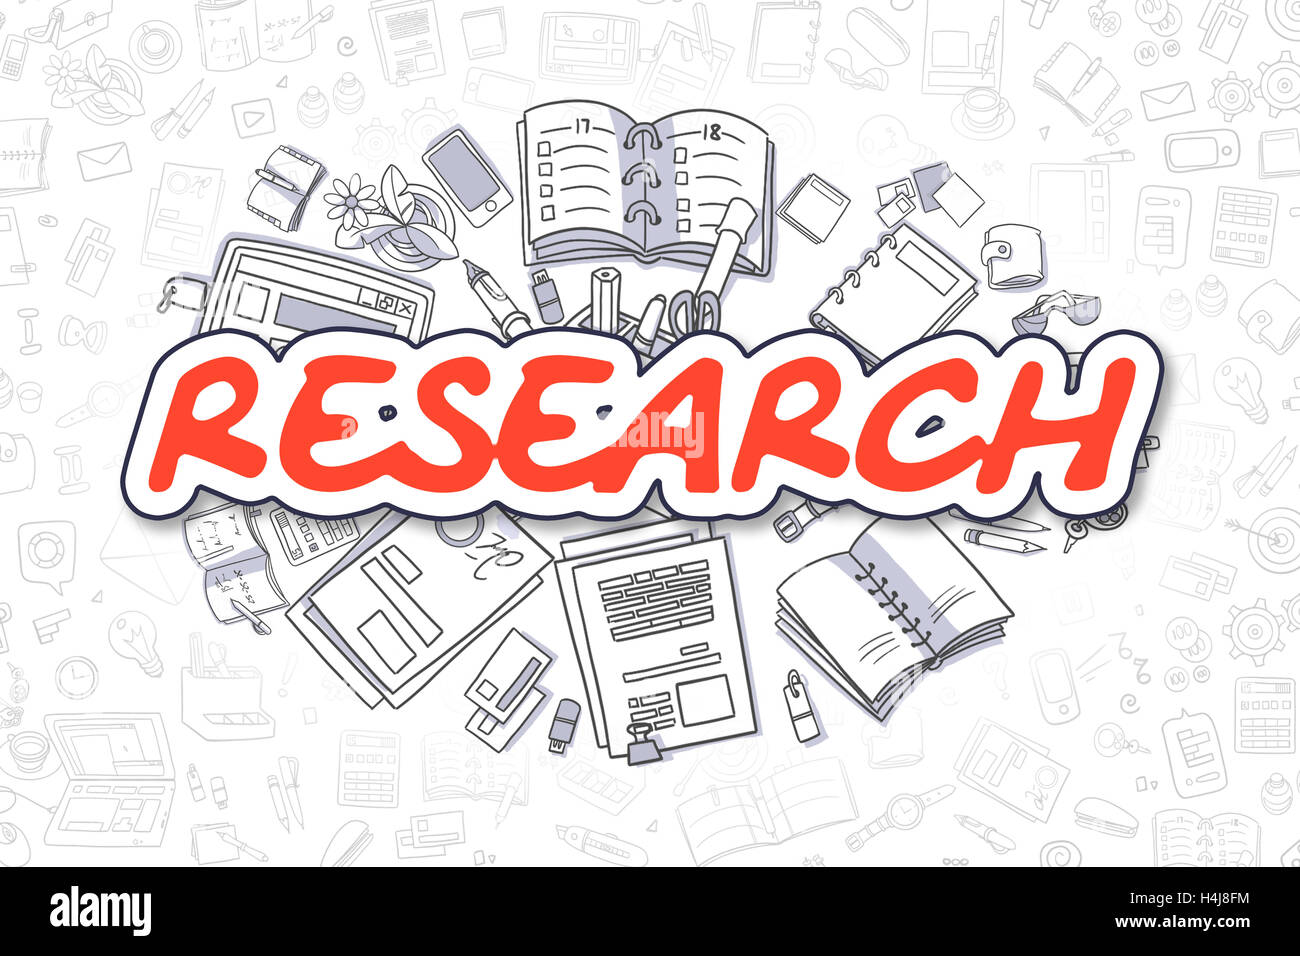 Research - Cartoon Red Inscription. Business Concept. Stock Photo